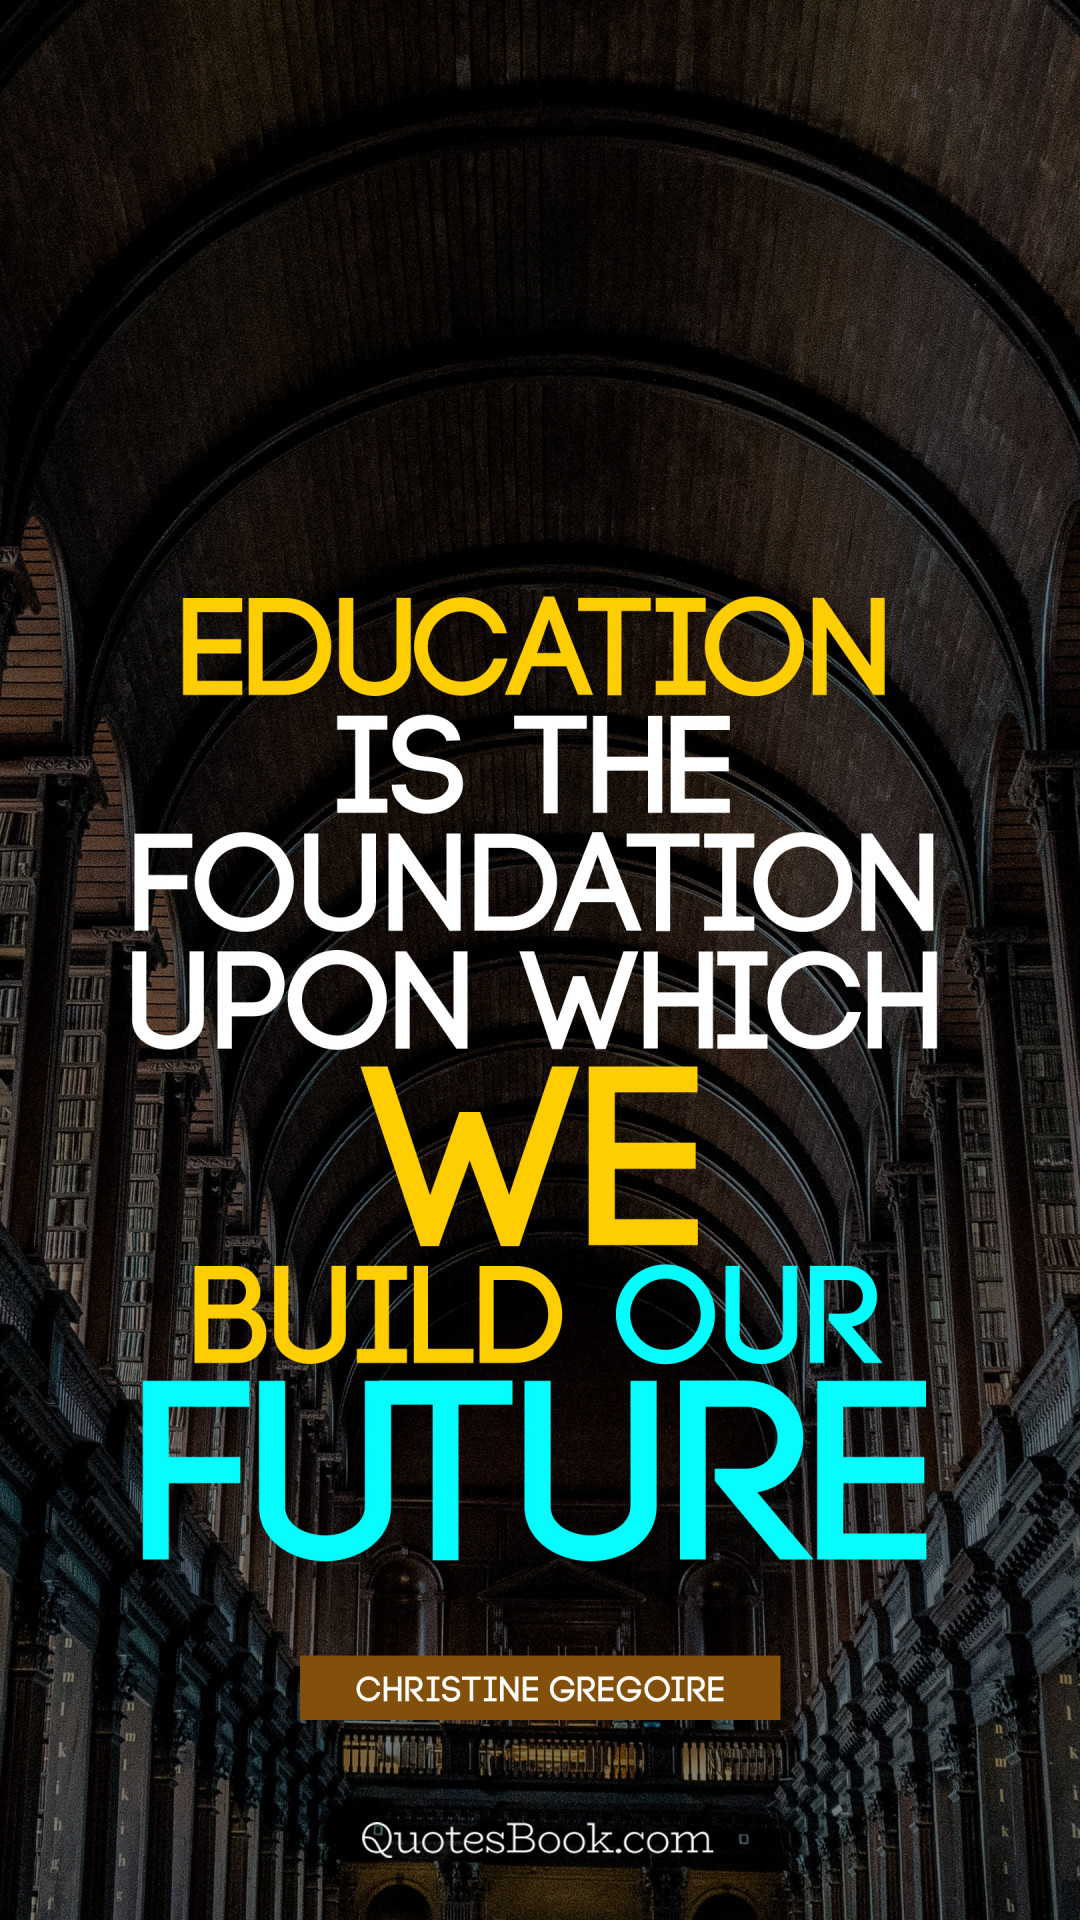 Education is the foundation upon which we build our future. - Quote by